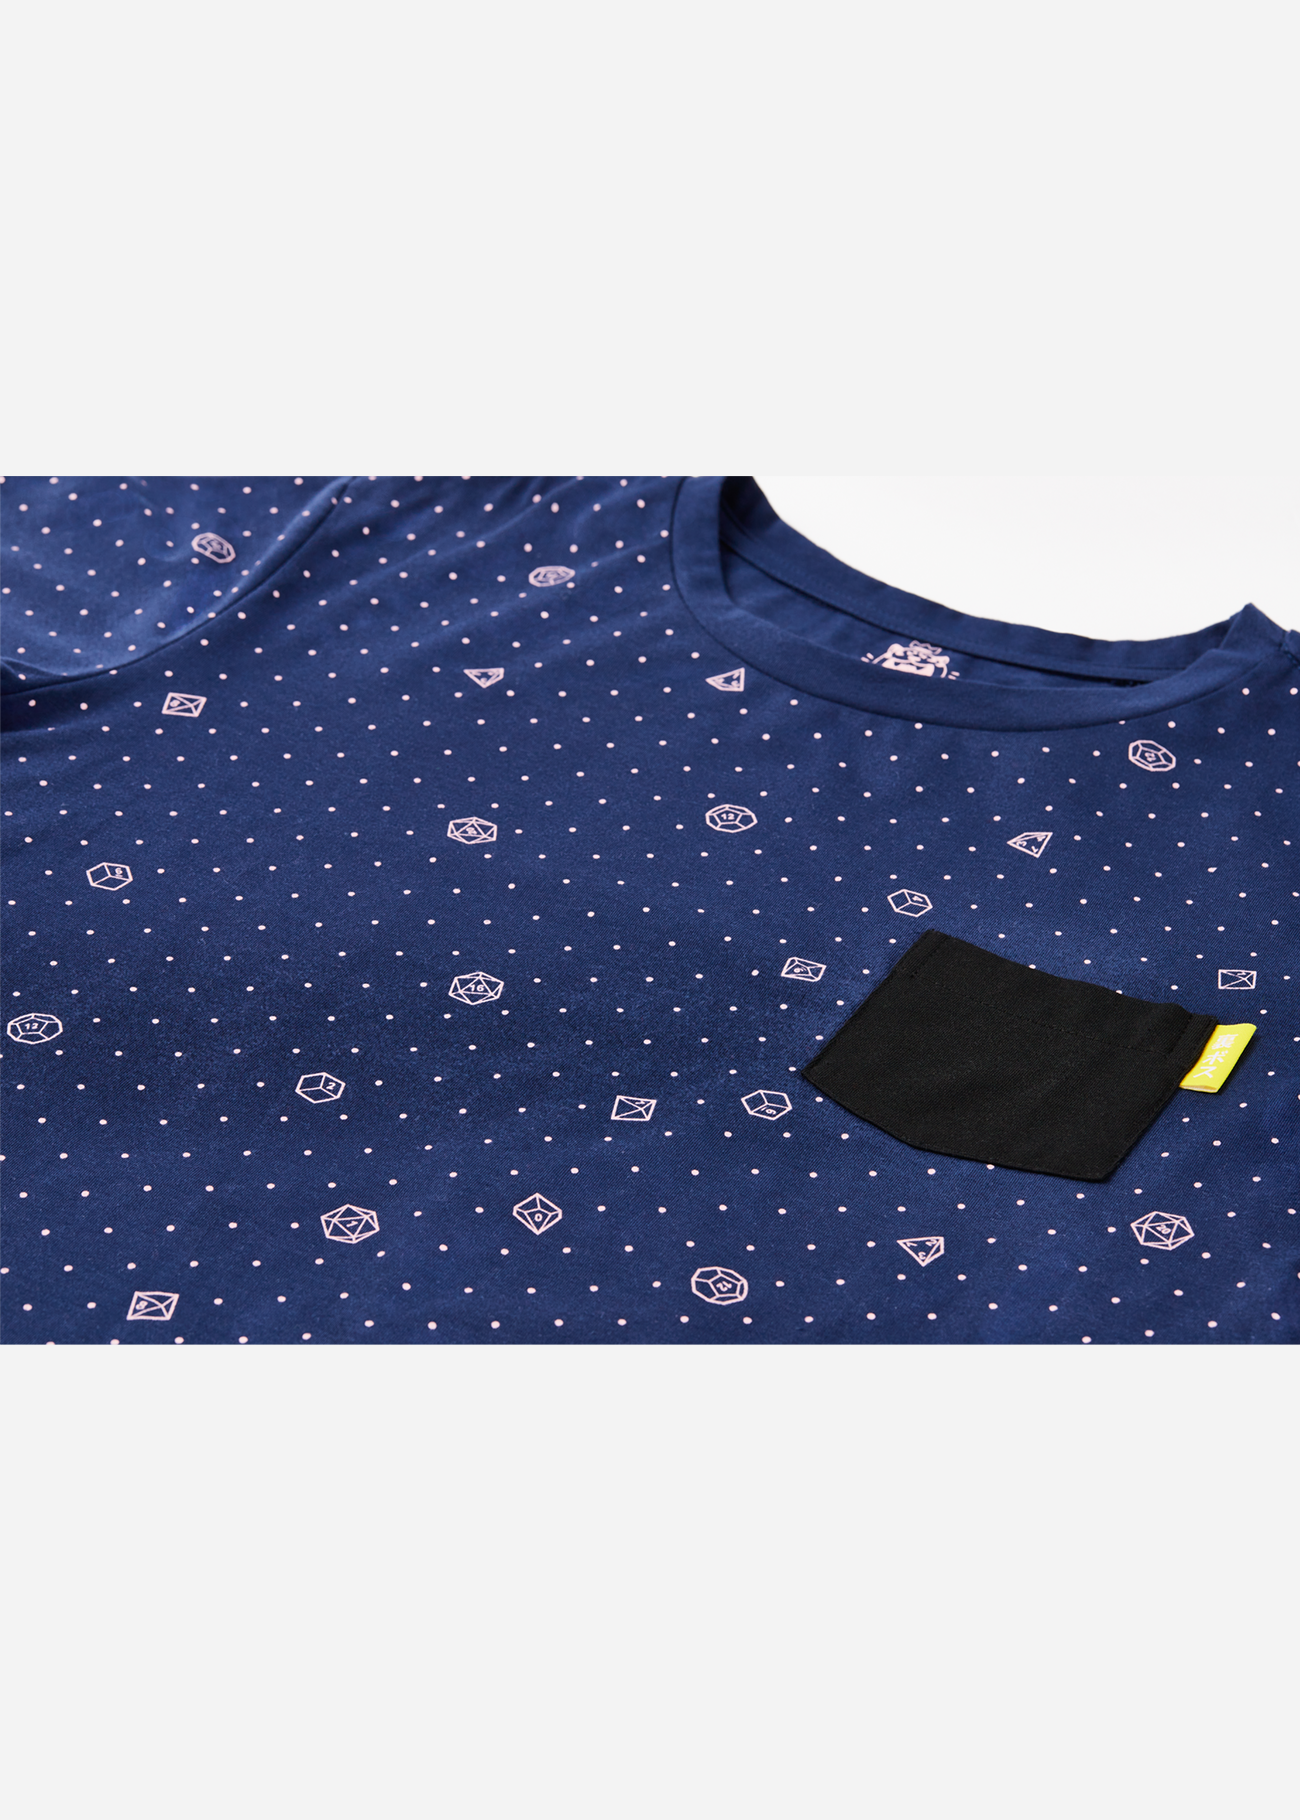 Graphic shirt with all over dice pattern and a pocket on the front